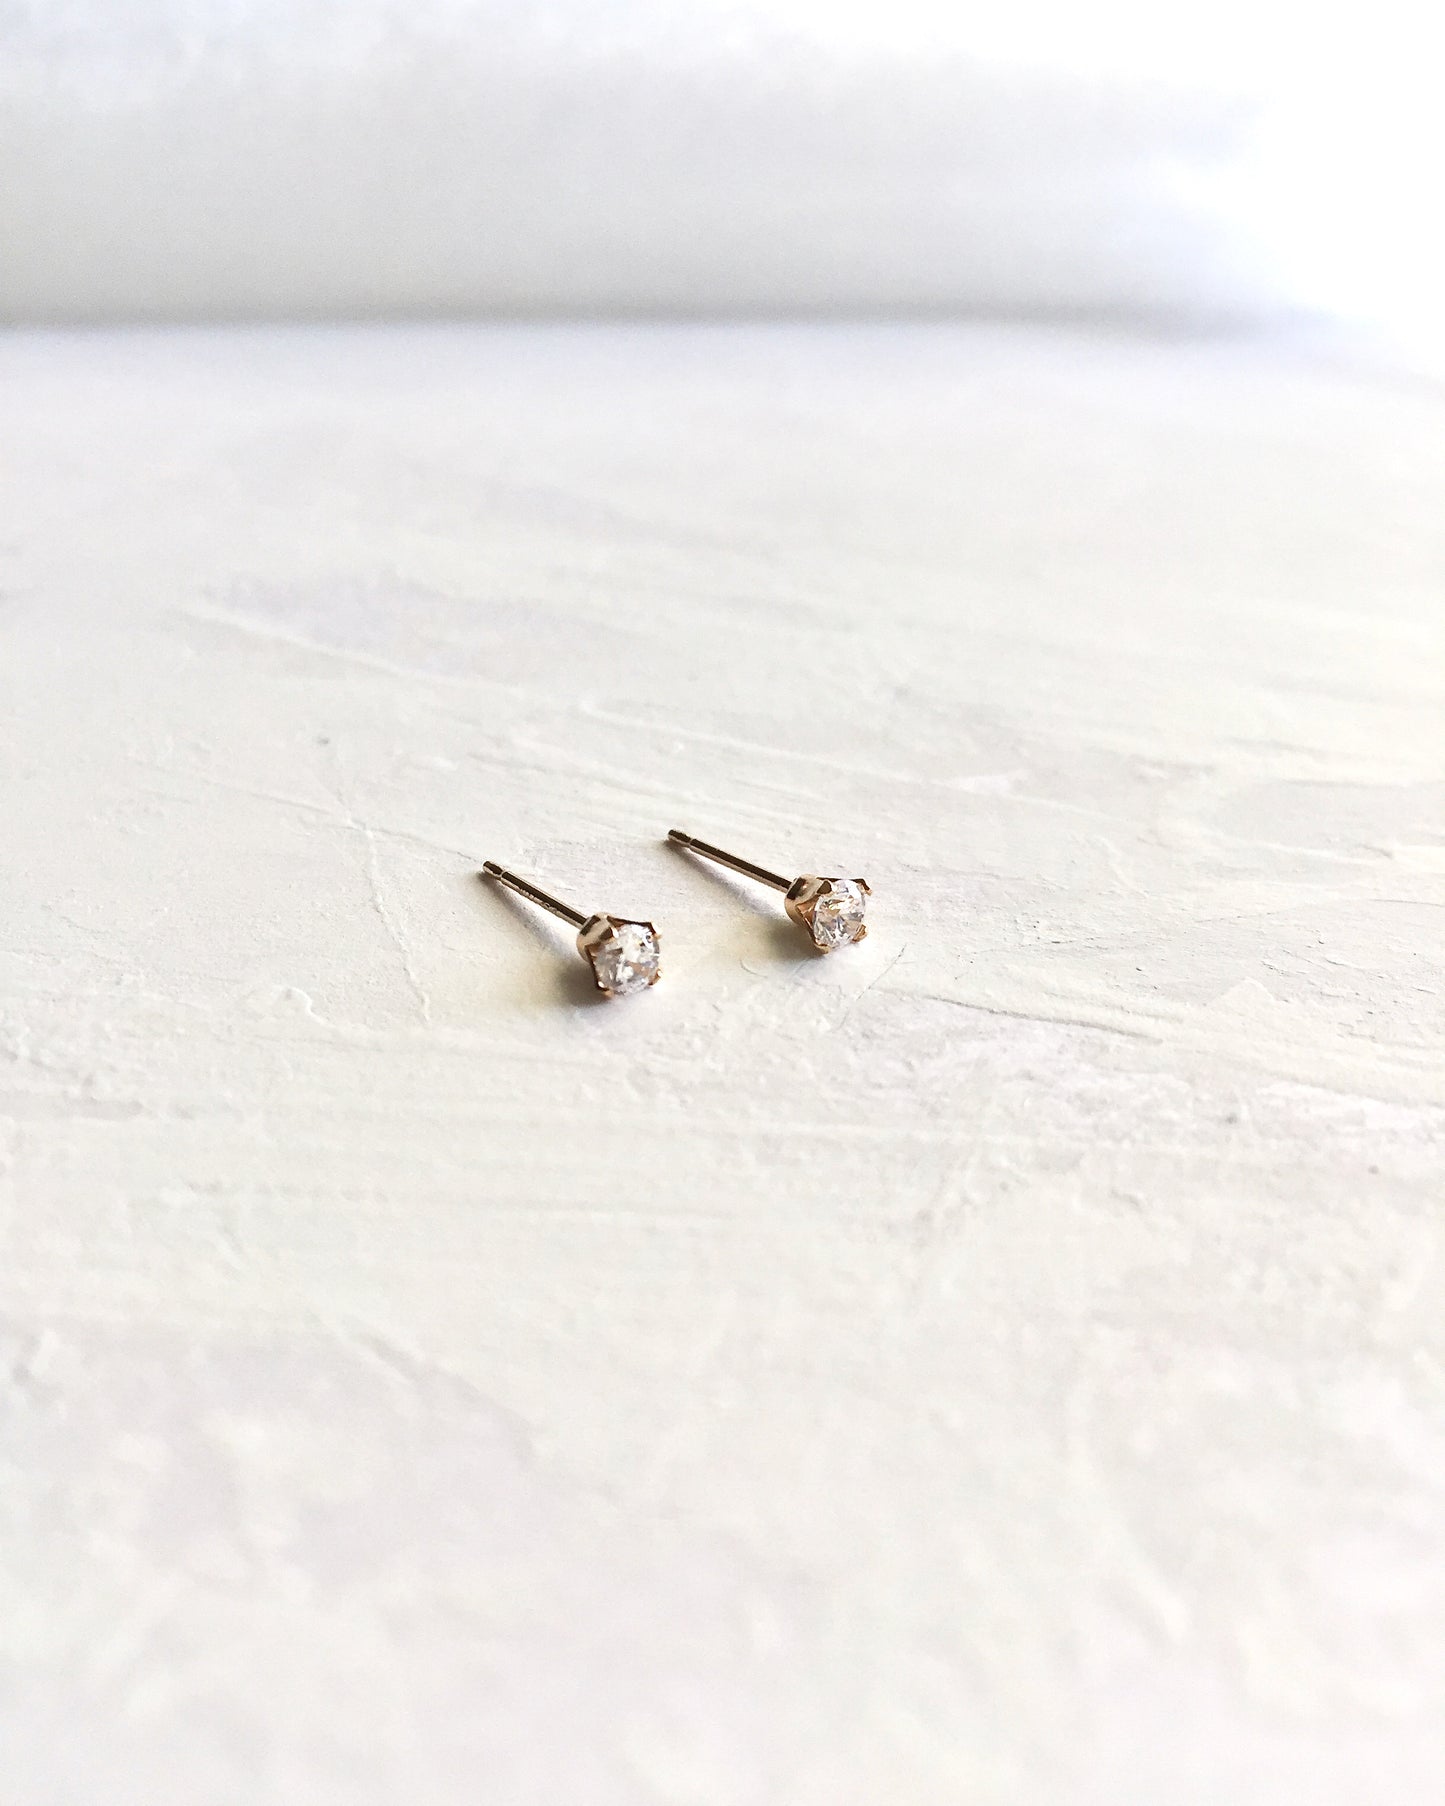 Delicate Stud Earrings | Tiny CZ Stud Earrings  In Gold Filled or Sterling Silver | Dainty Jewelry Gift | IB Jewelry